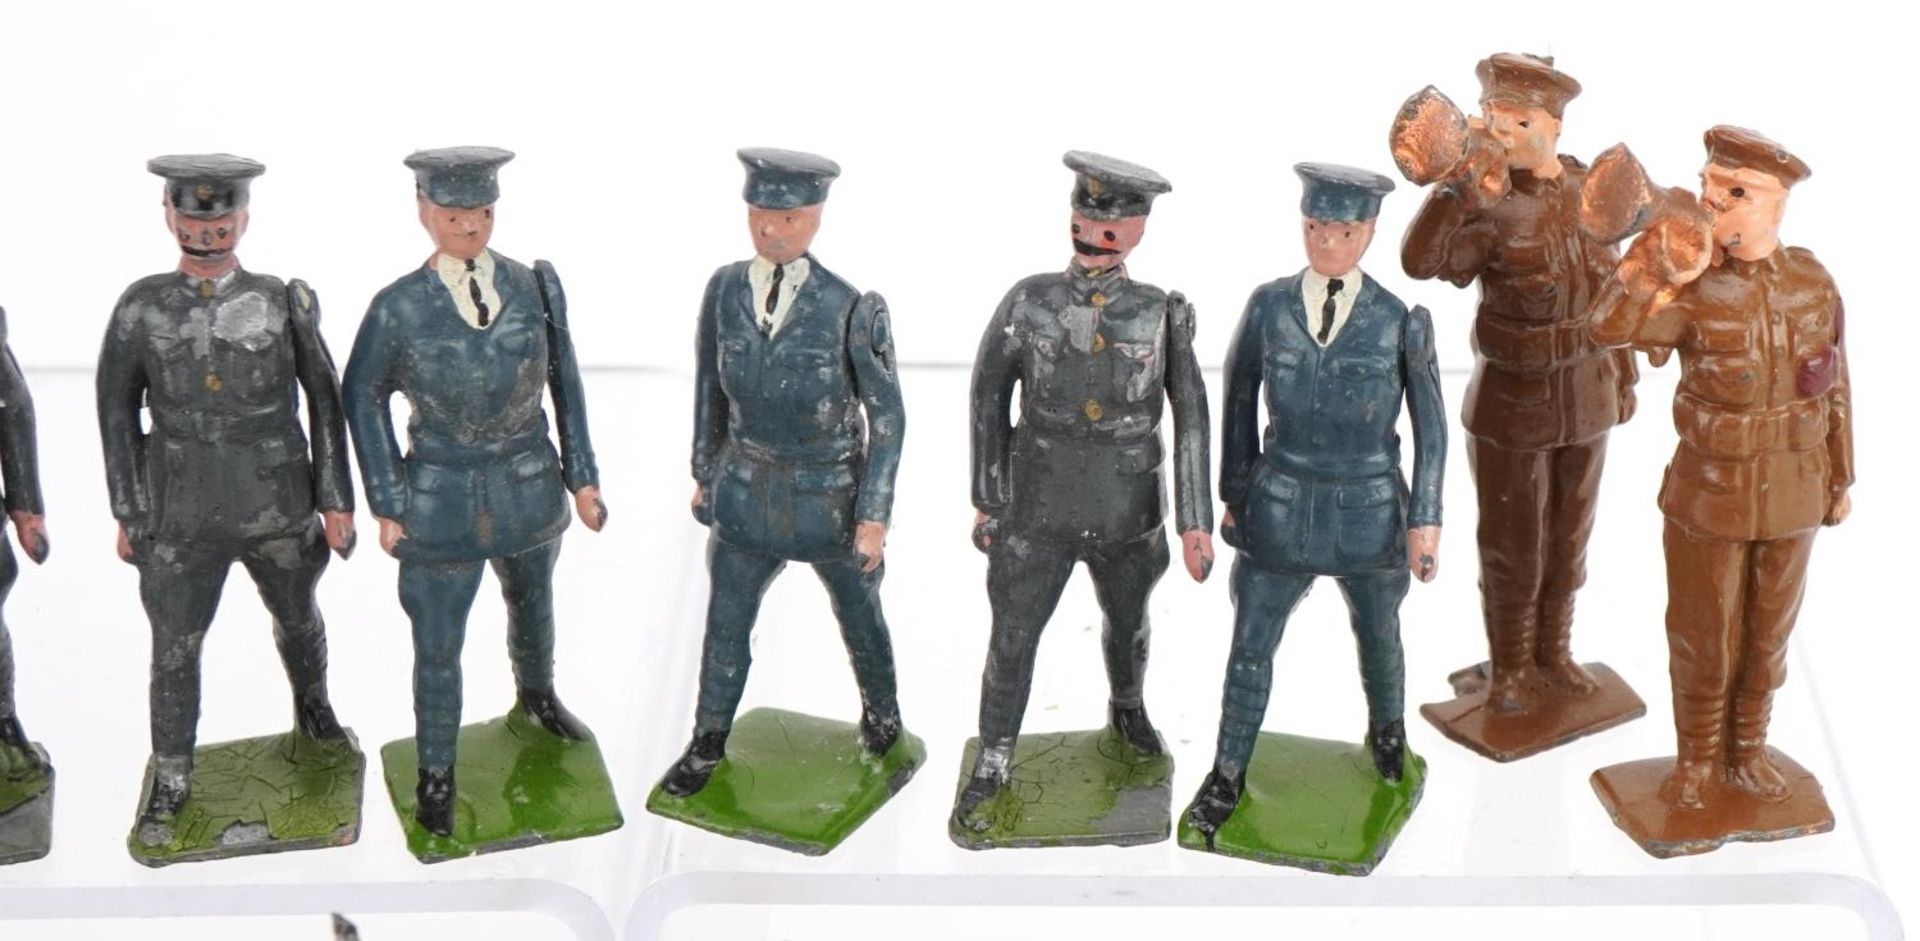 John Hill & Co and Britains hand painted lead soldiers including Seaforth Highlanders, with paper - Bild 4 aus 9